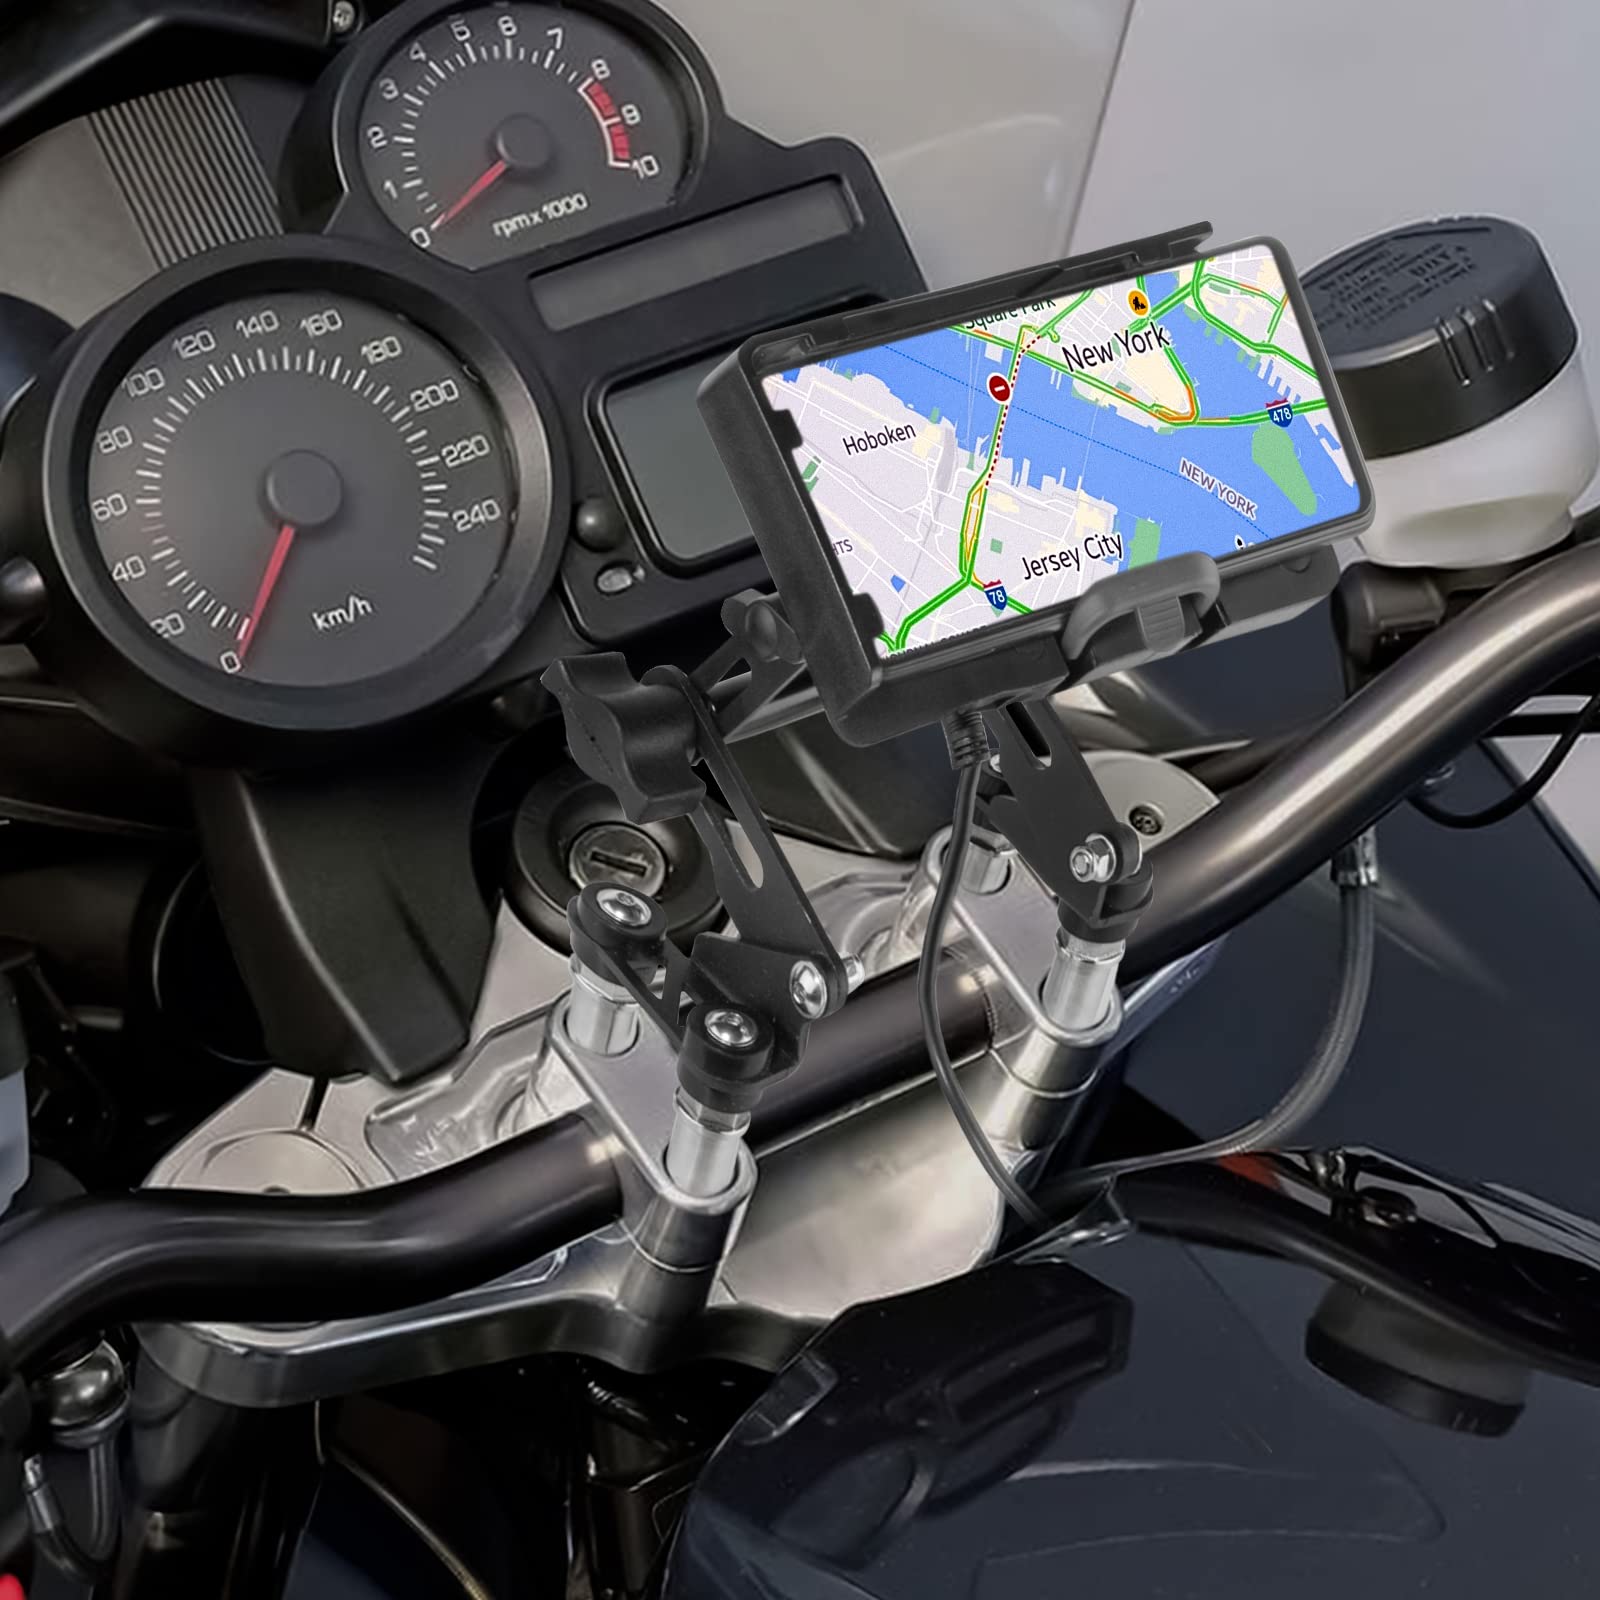 GUAIMI Motorcycle Phone Mount, Phone Holder with Adjustment for The Original Navigation Holder Compatible with R1200GS R1250GS F850GS F800GS S1000R R1200R -Black